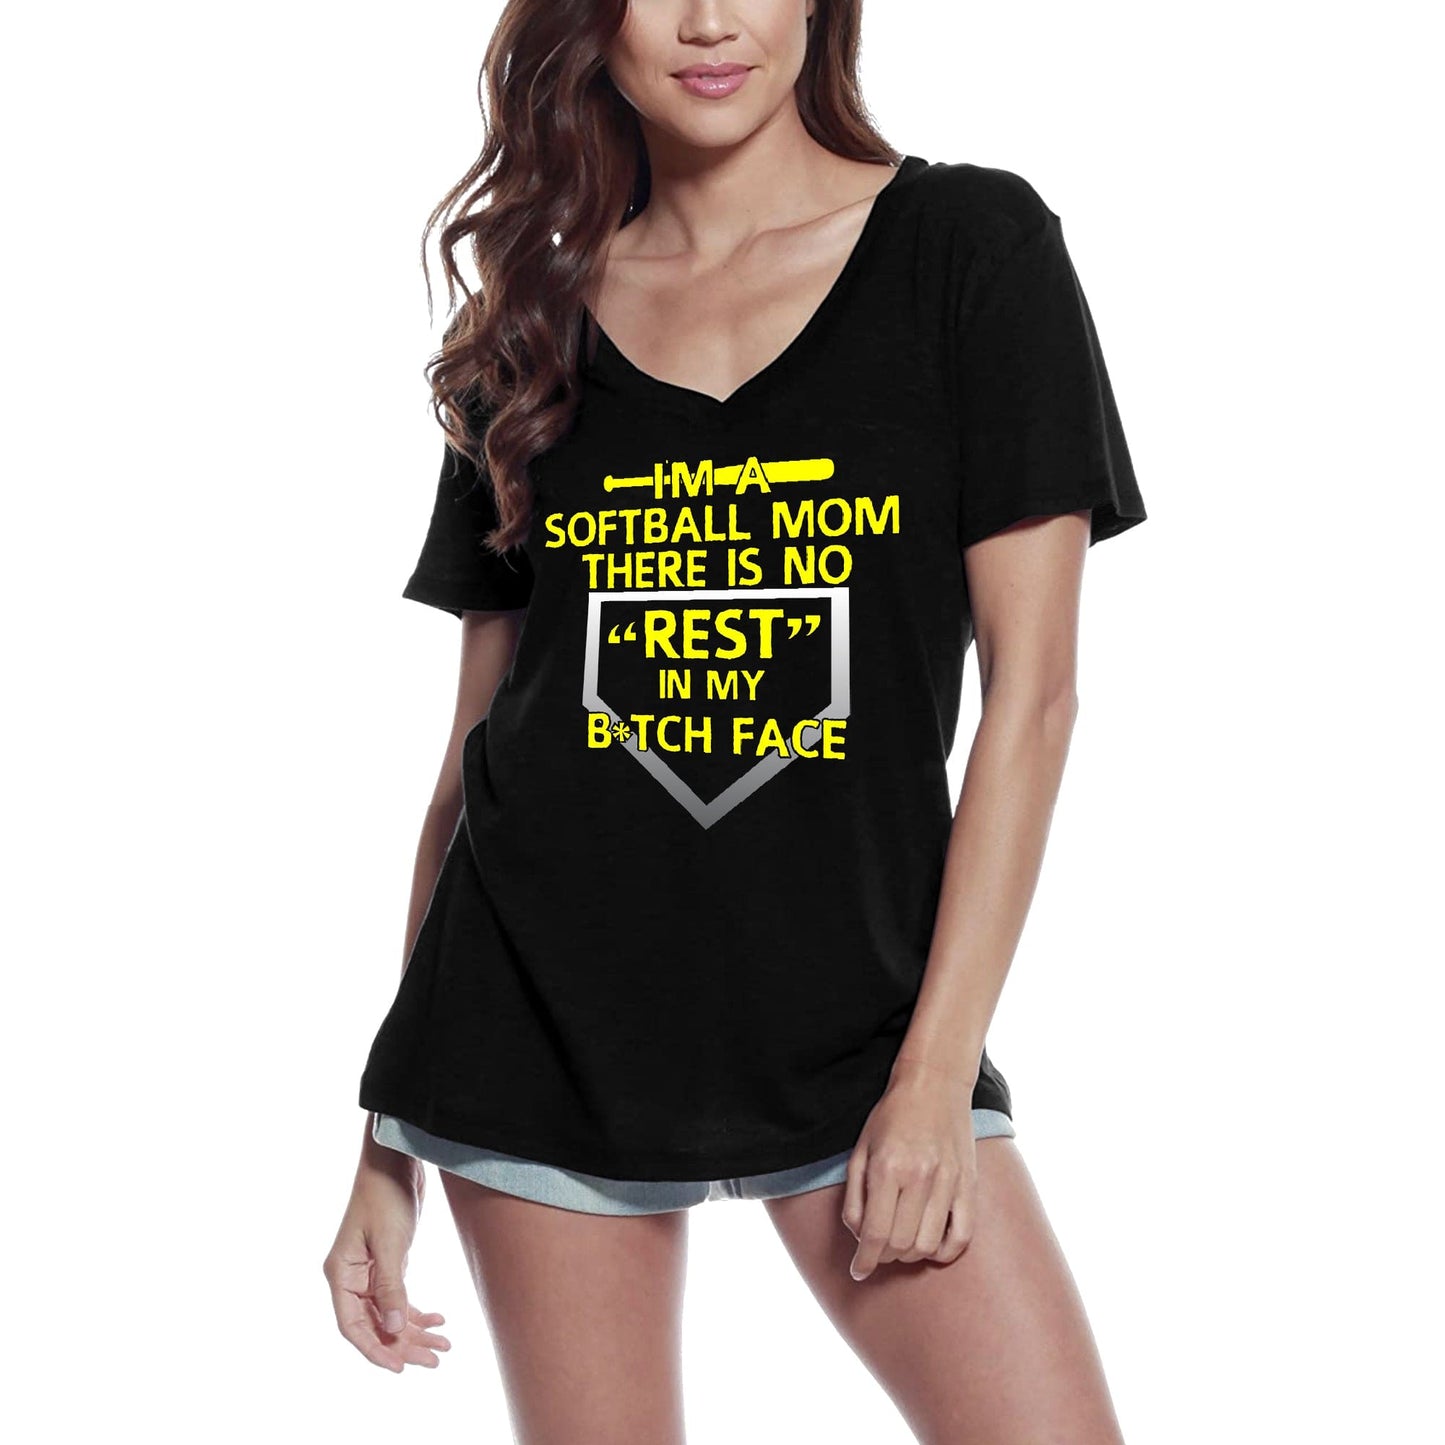 ULTRABASIC Women's T-Shirt I'm a Softball Mom There is No Rest in My Face - Funny Tee Shirt